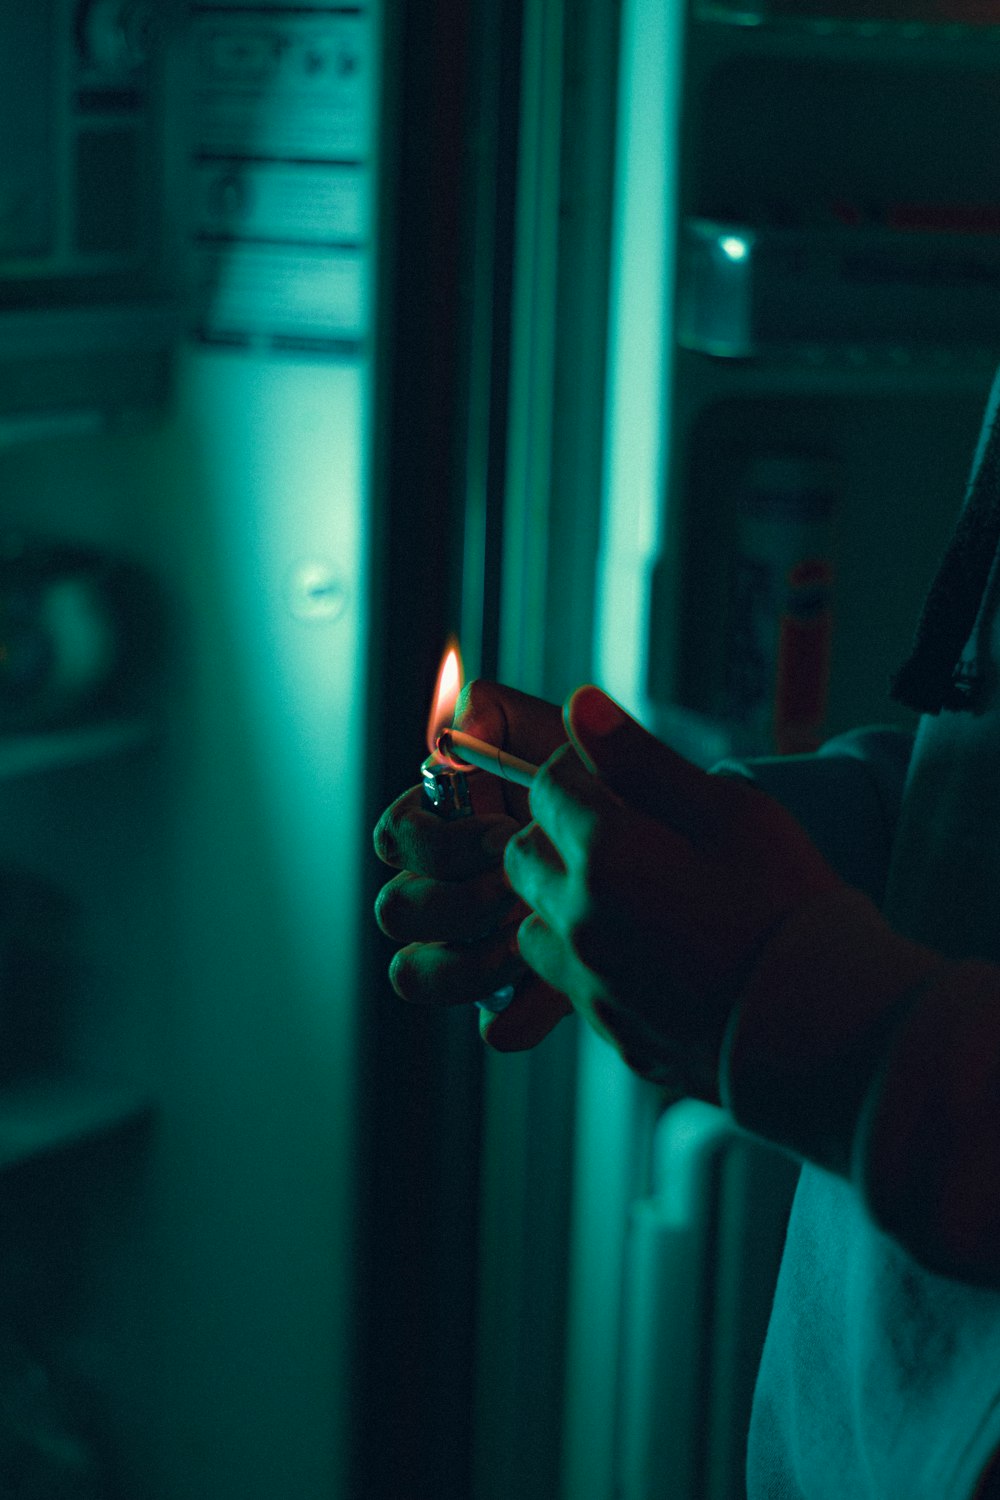 a person holding a lighter in their hand